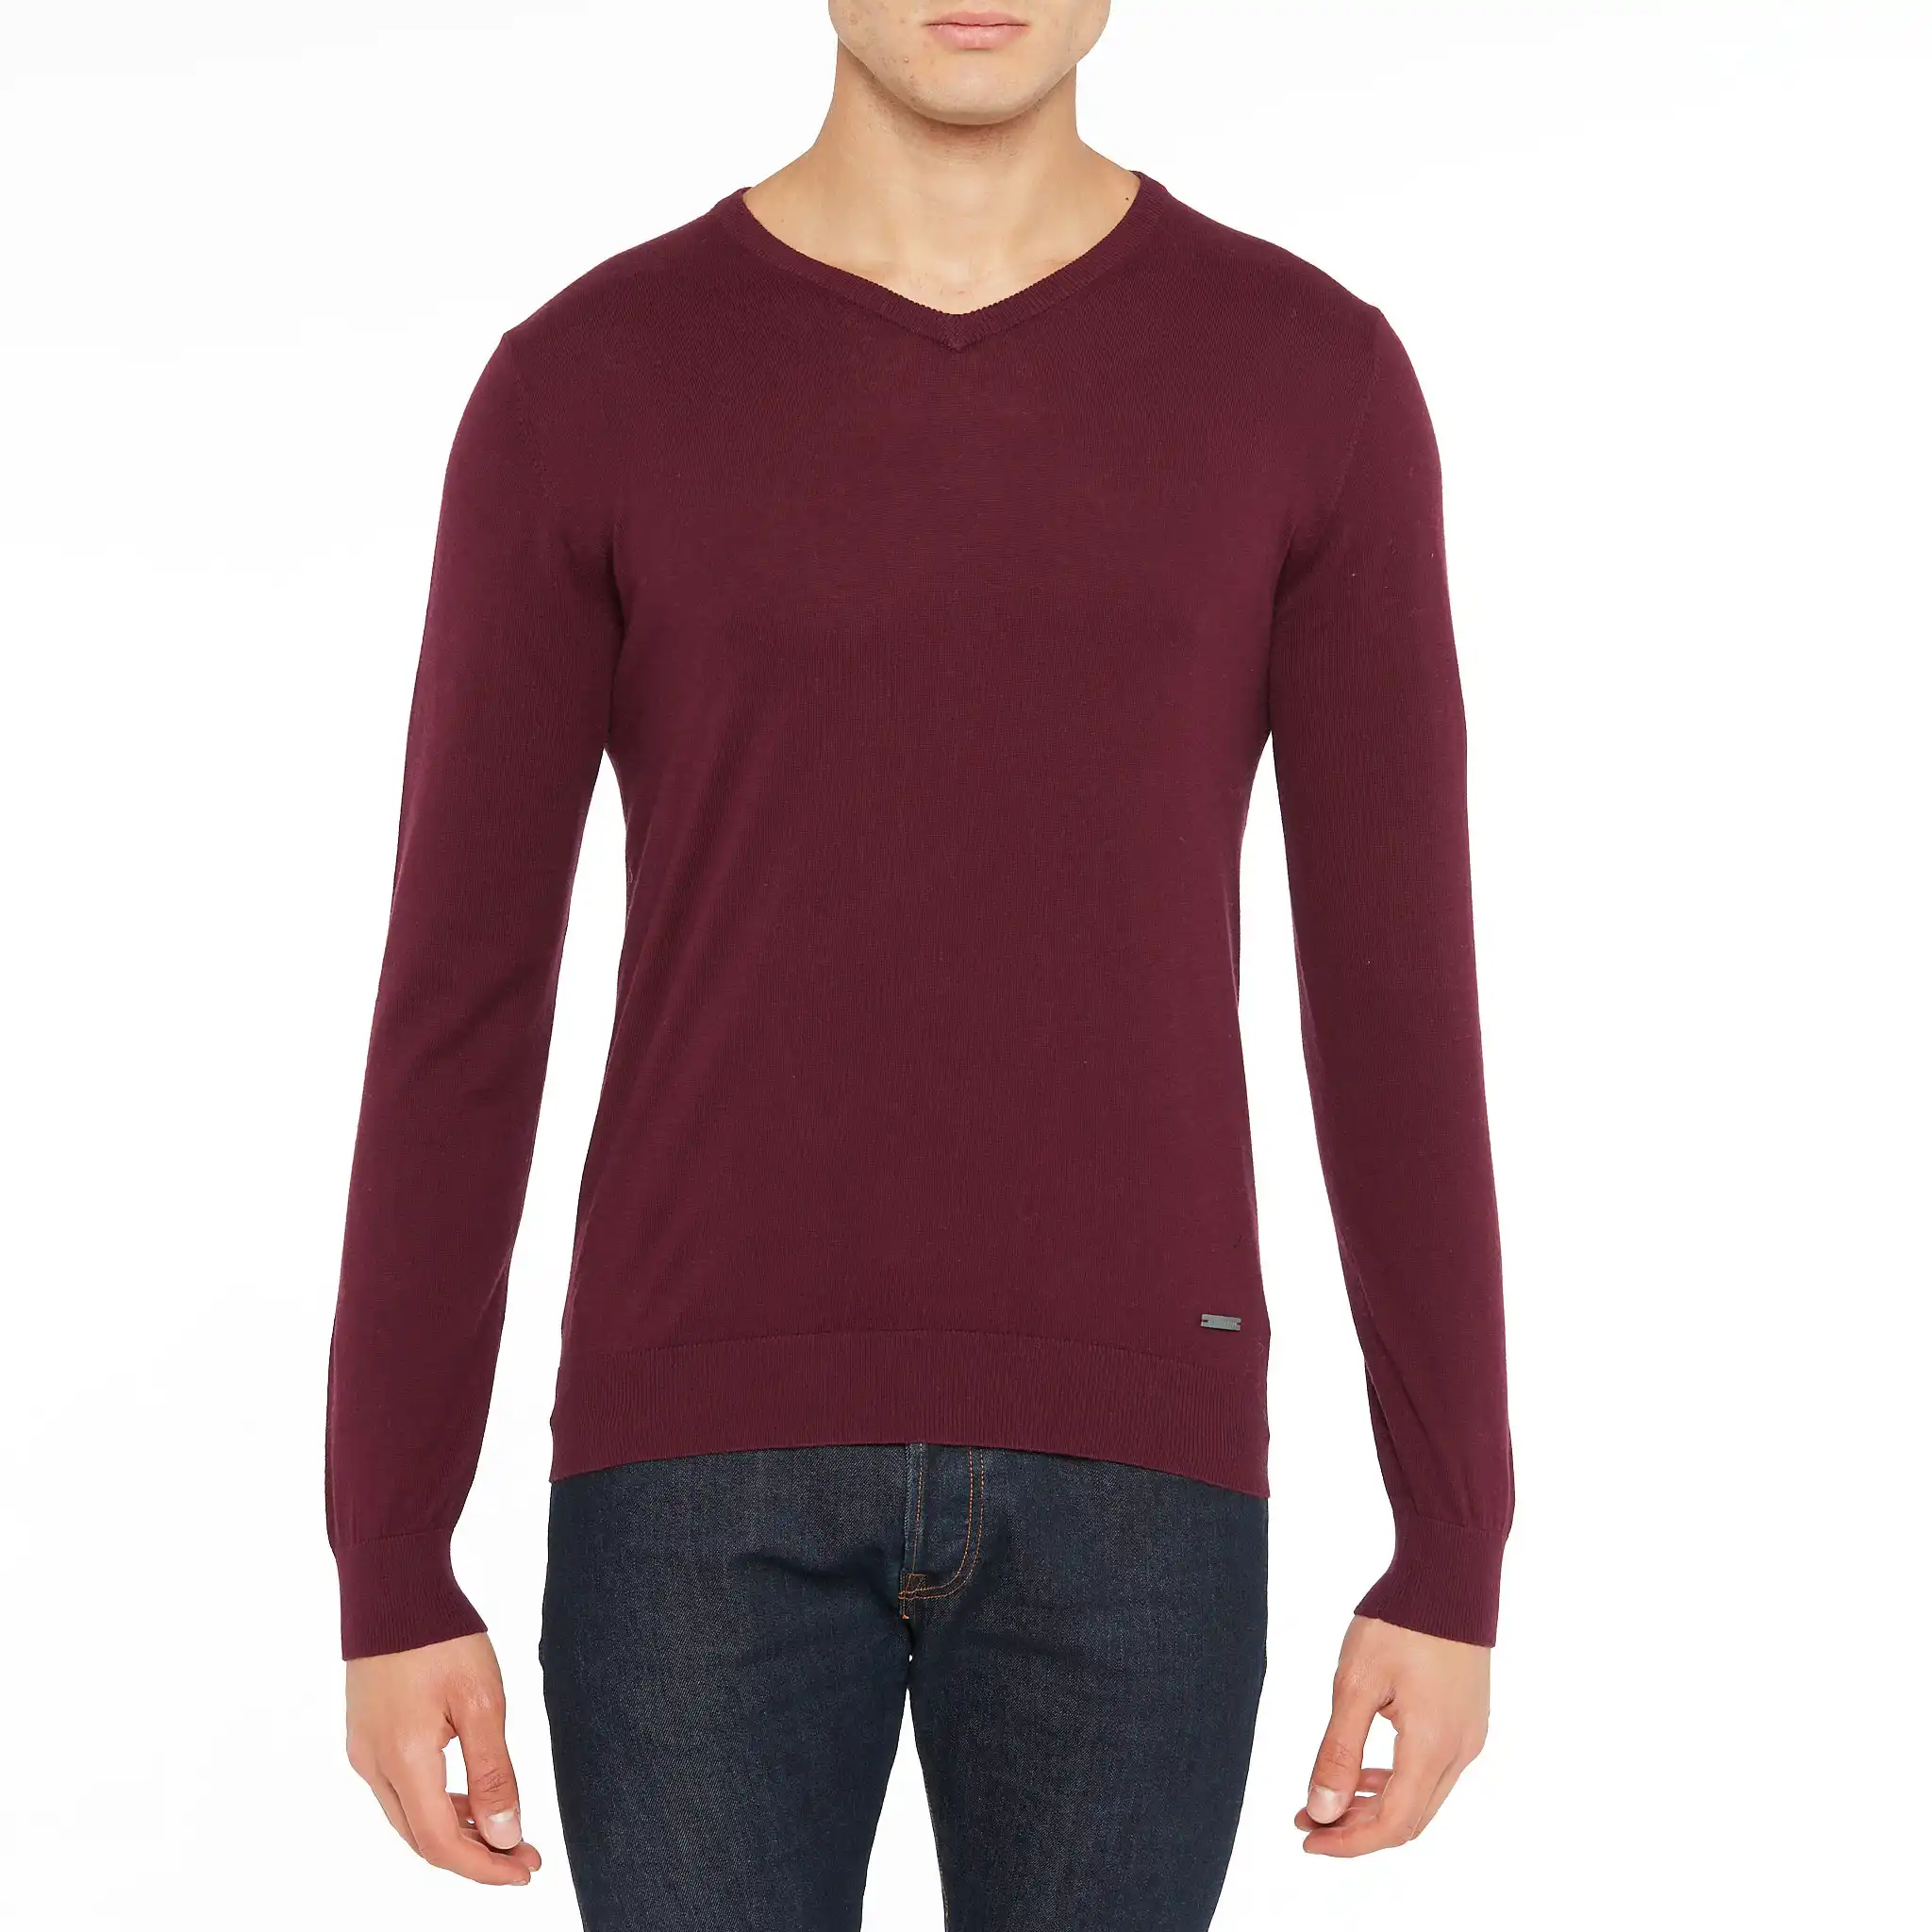 MADE IN ITALY COTTON CASHMERE LONG SLEEVES MEN'S V NECK SWEATERS